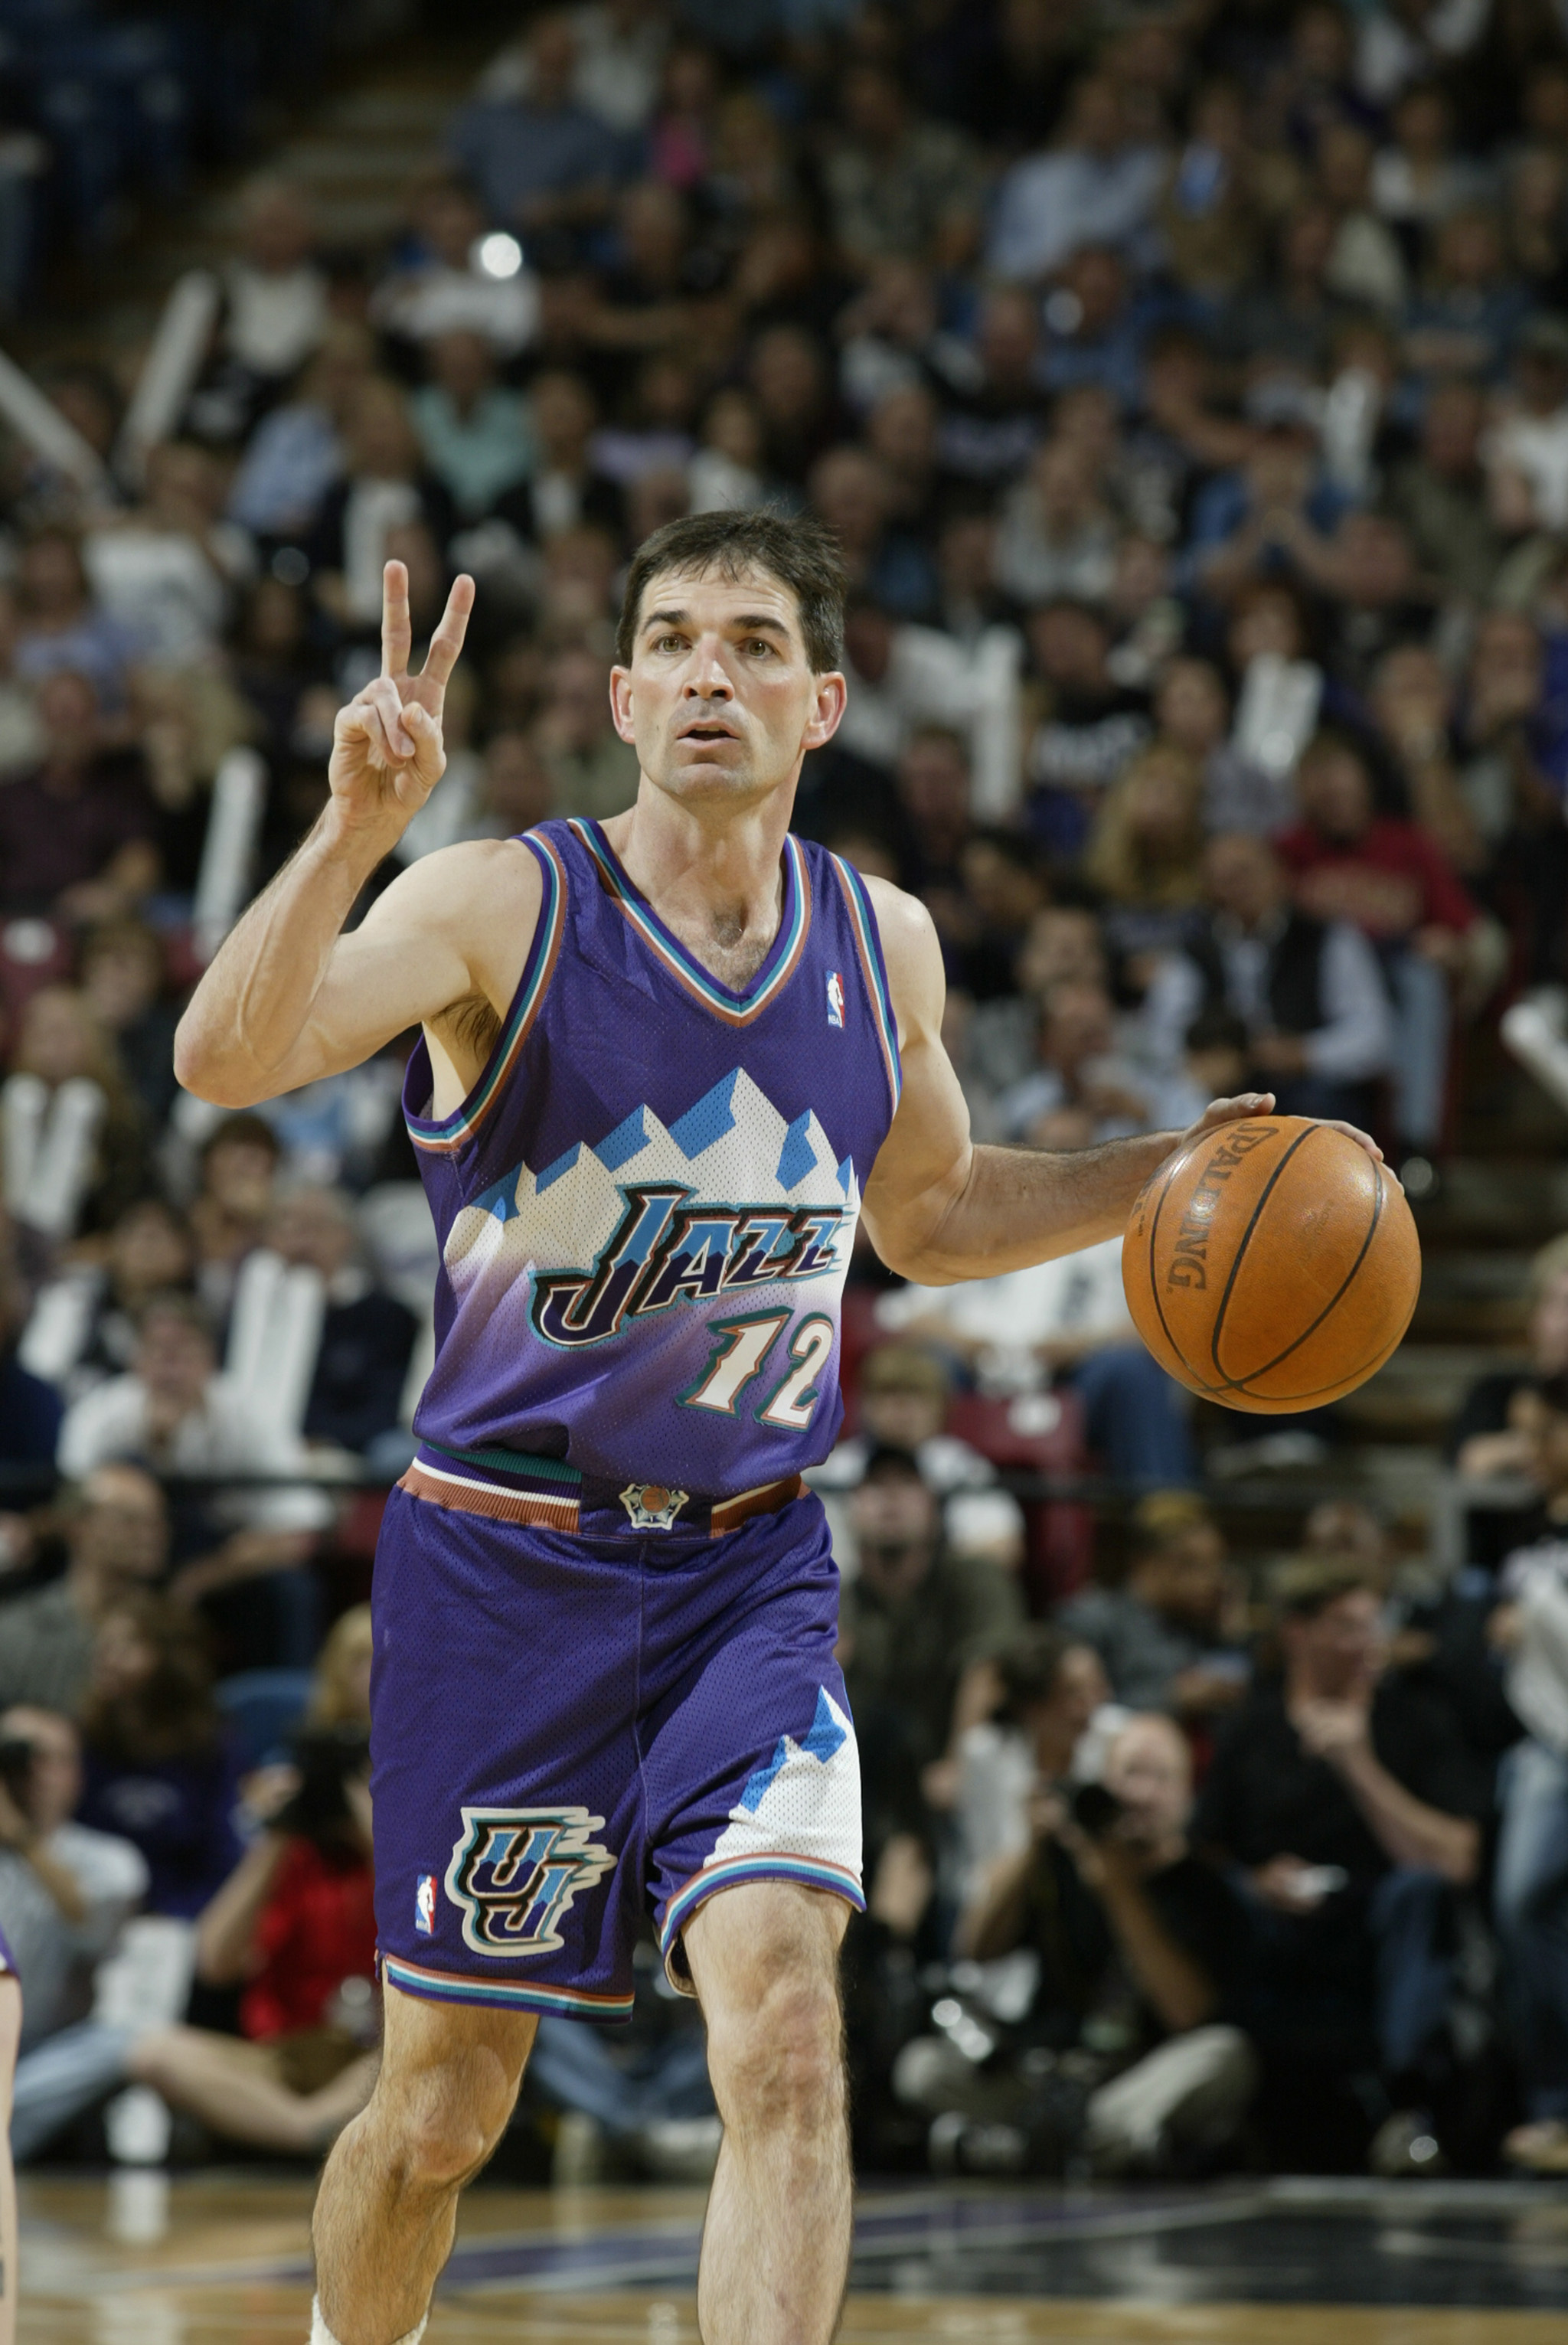 Legends of the NBA: 25 Best Players of the 90s